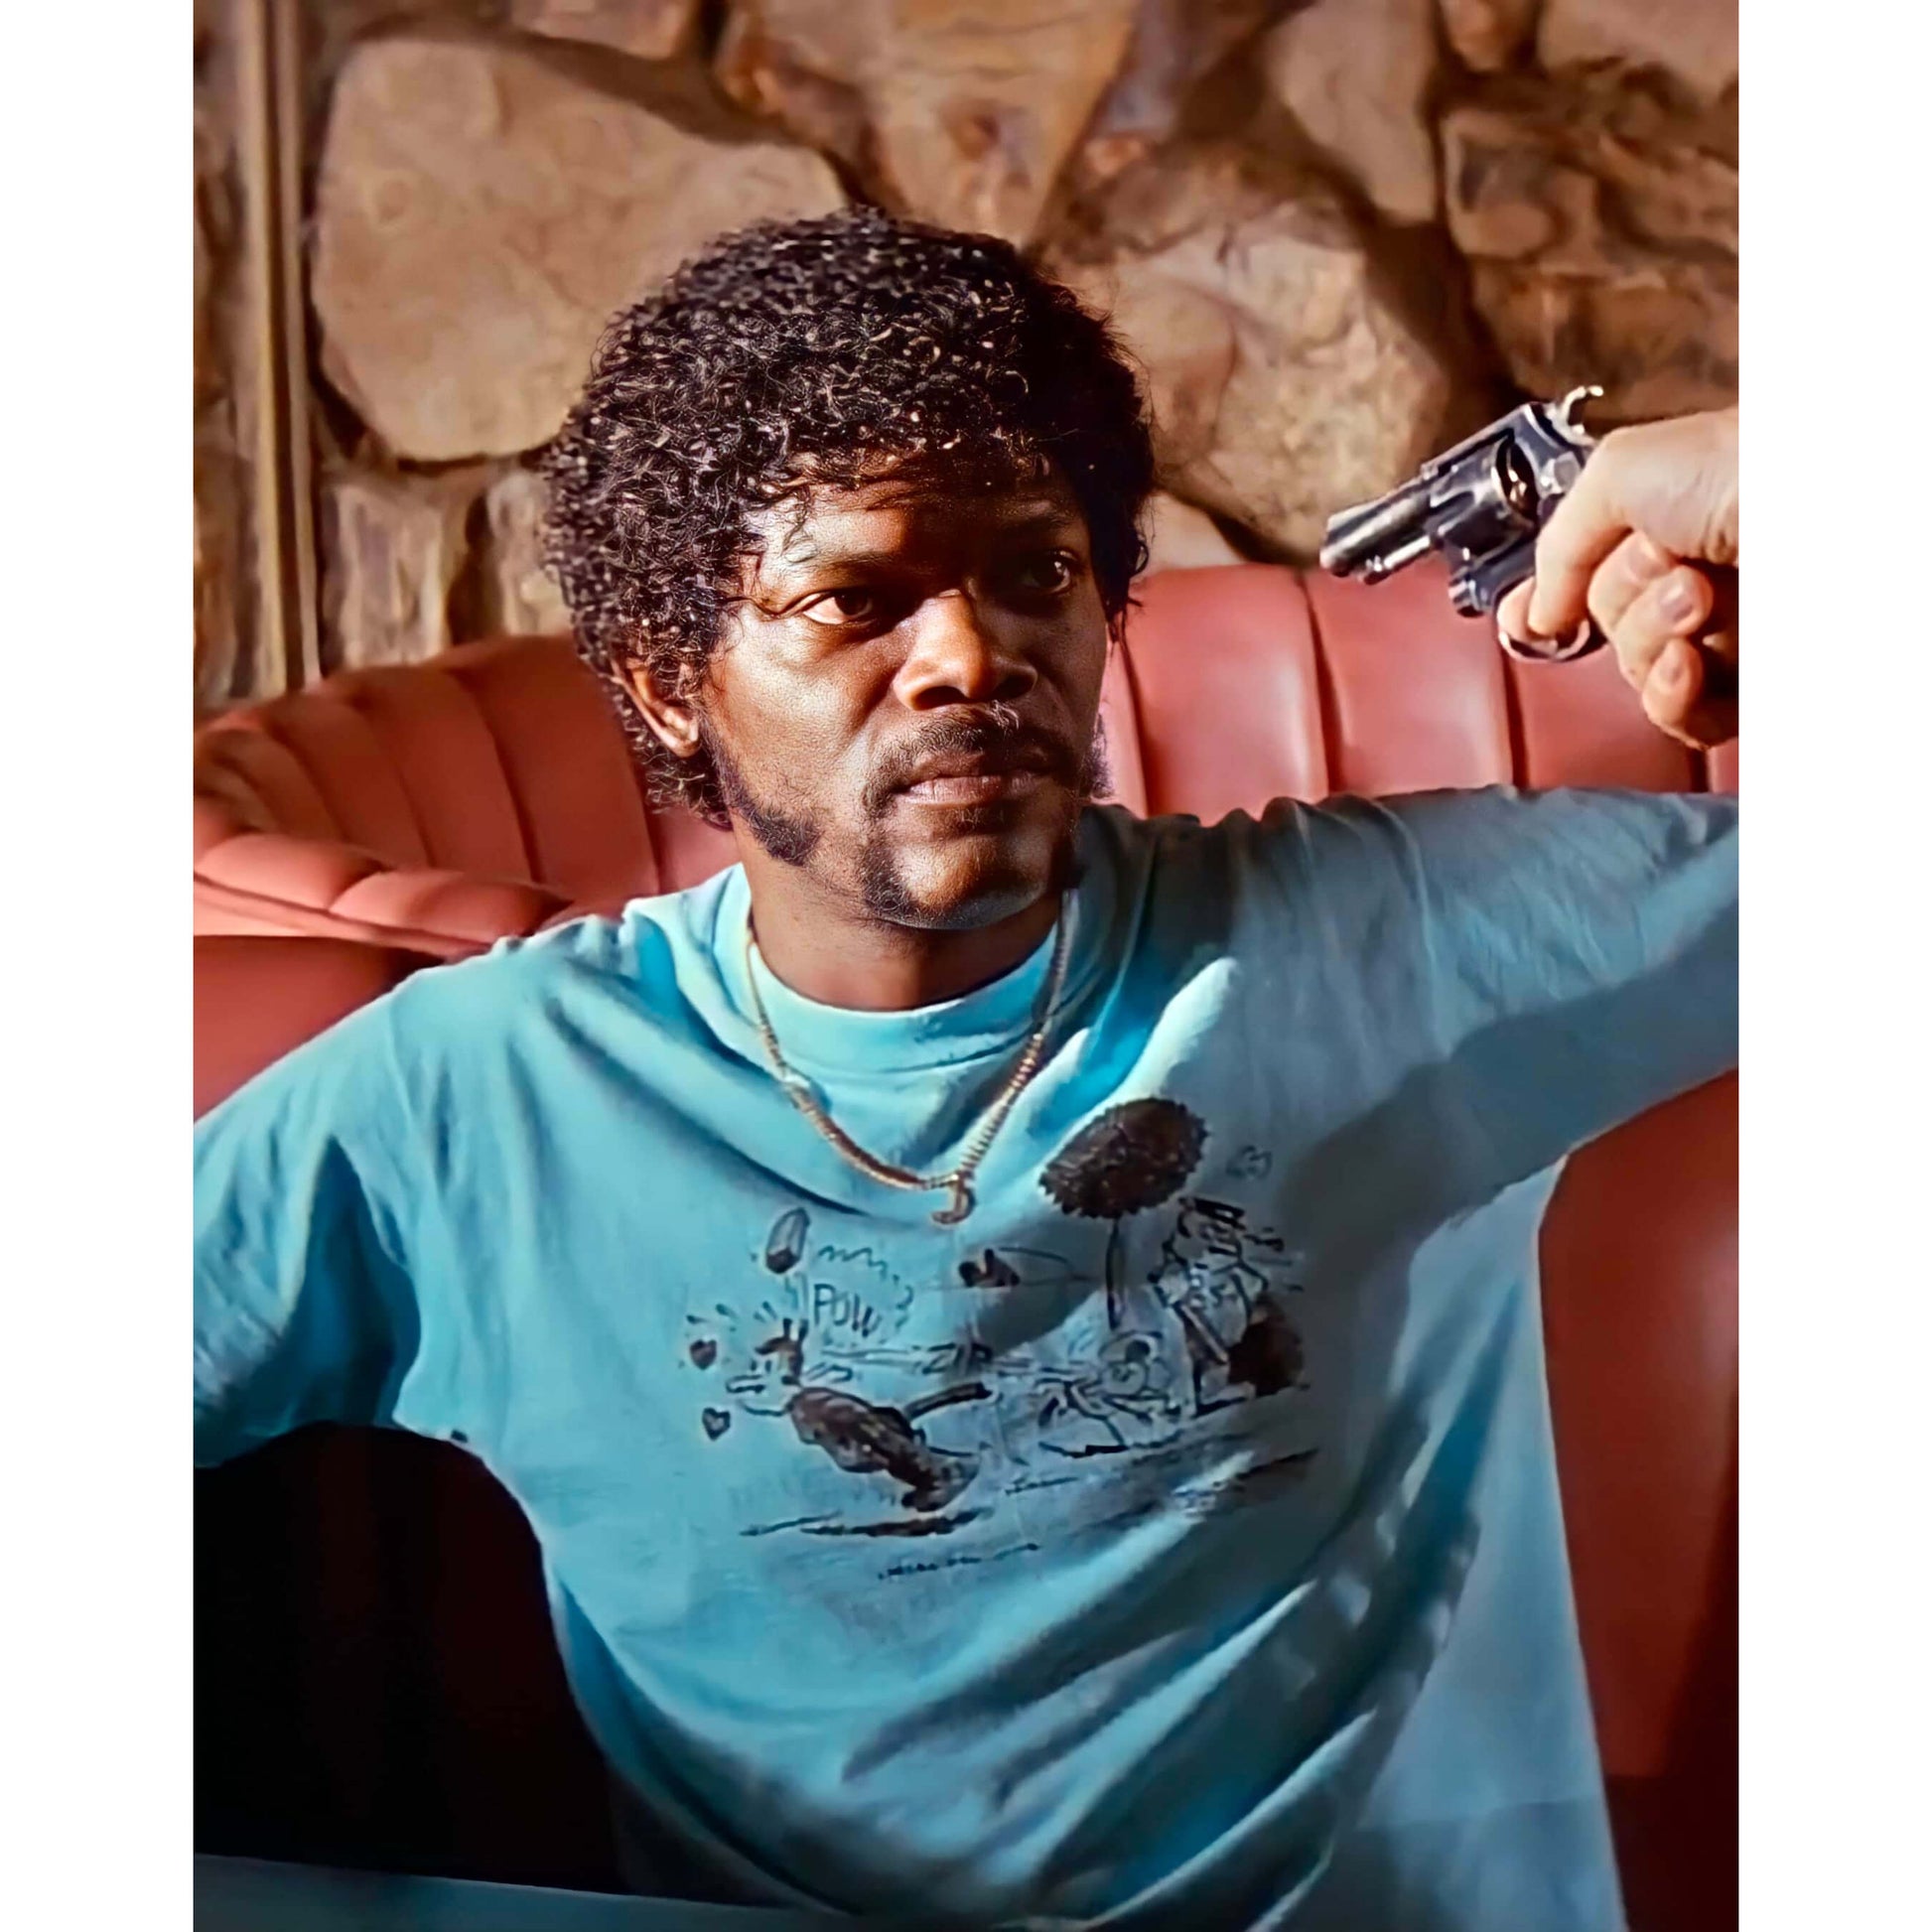 Jules Winnfield T-Shirt: Show your love for one of the most memorable characters in cinema history.